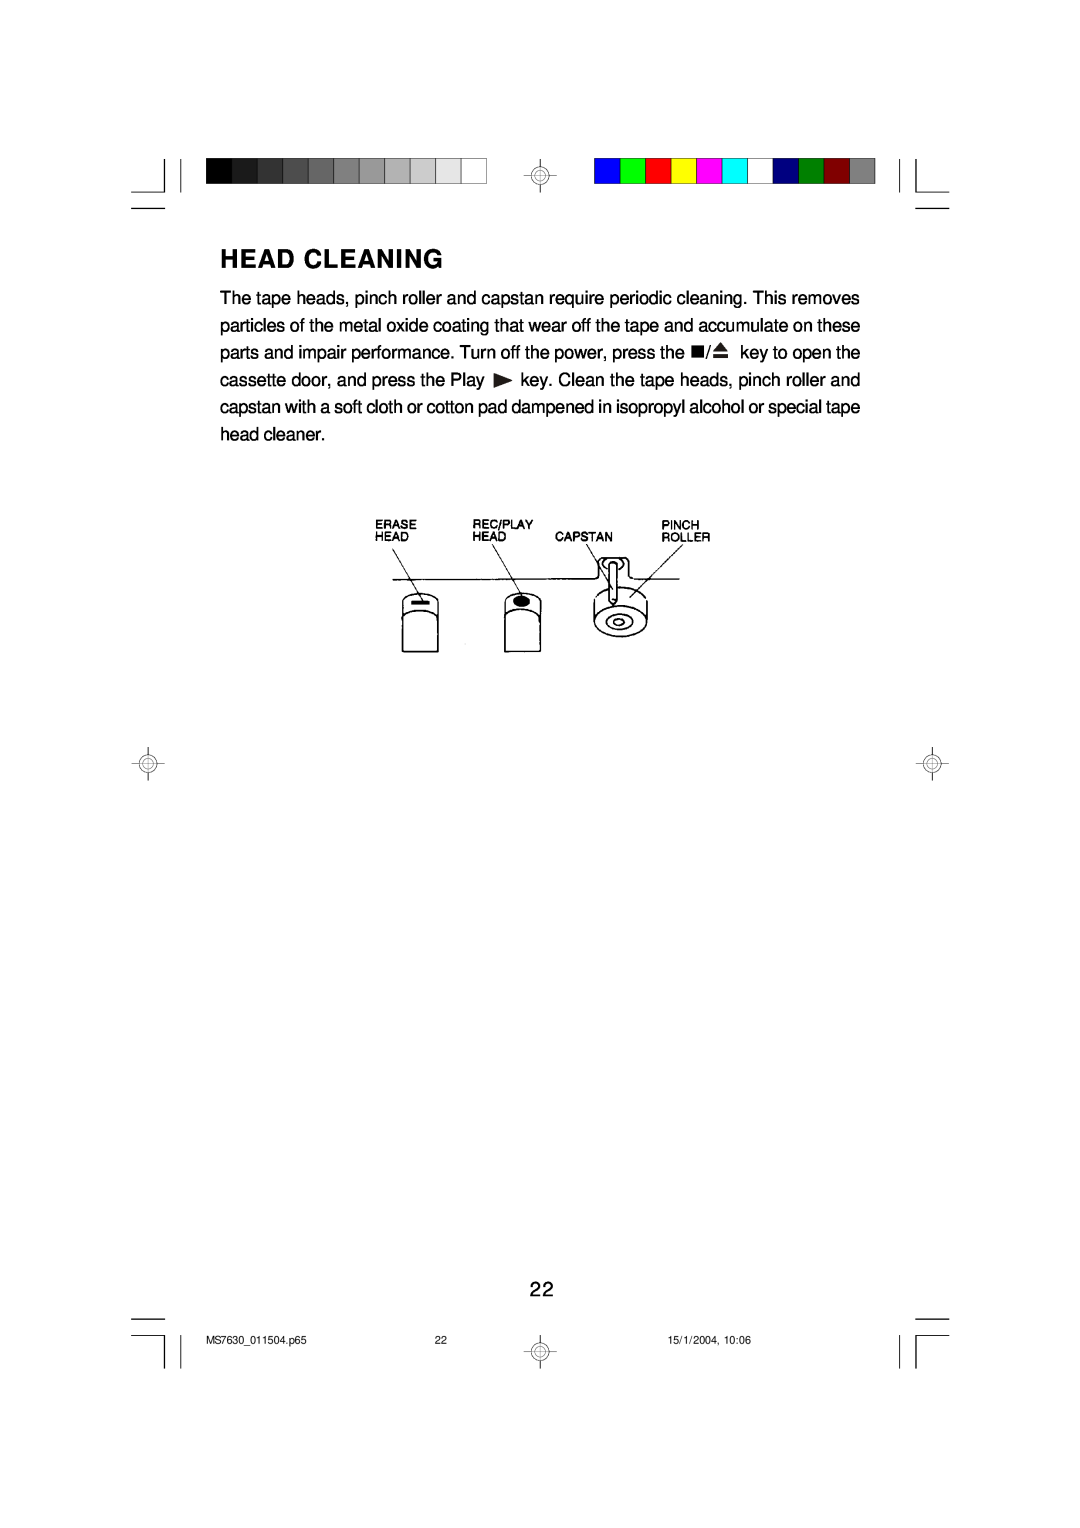 Emerson owner manual Head Cleaning, MS7630 011504.p65, 15/1/2004 